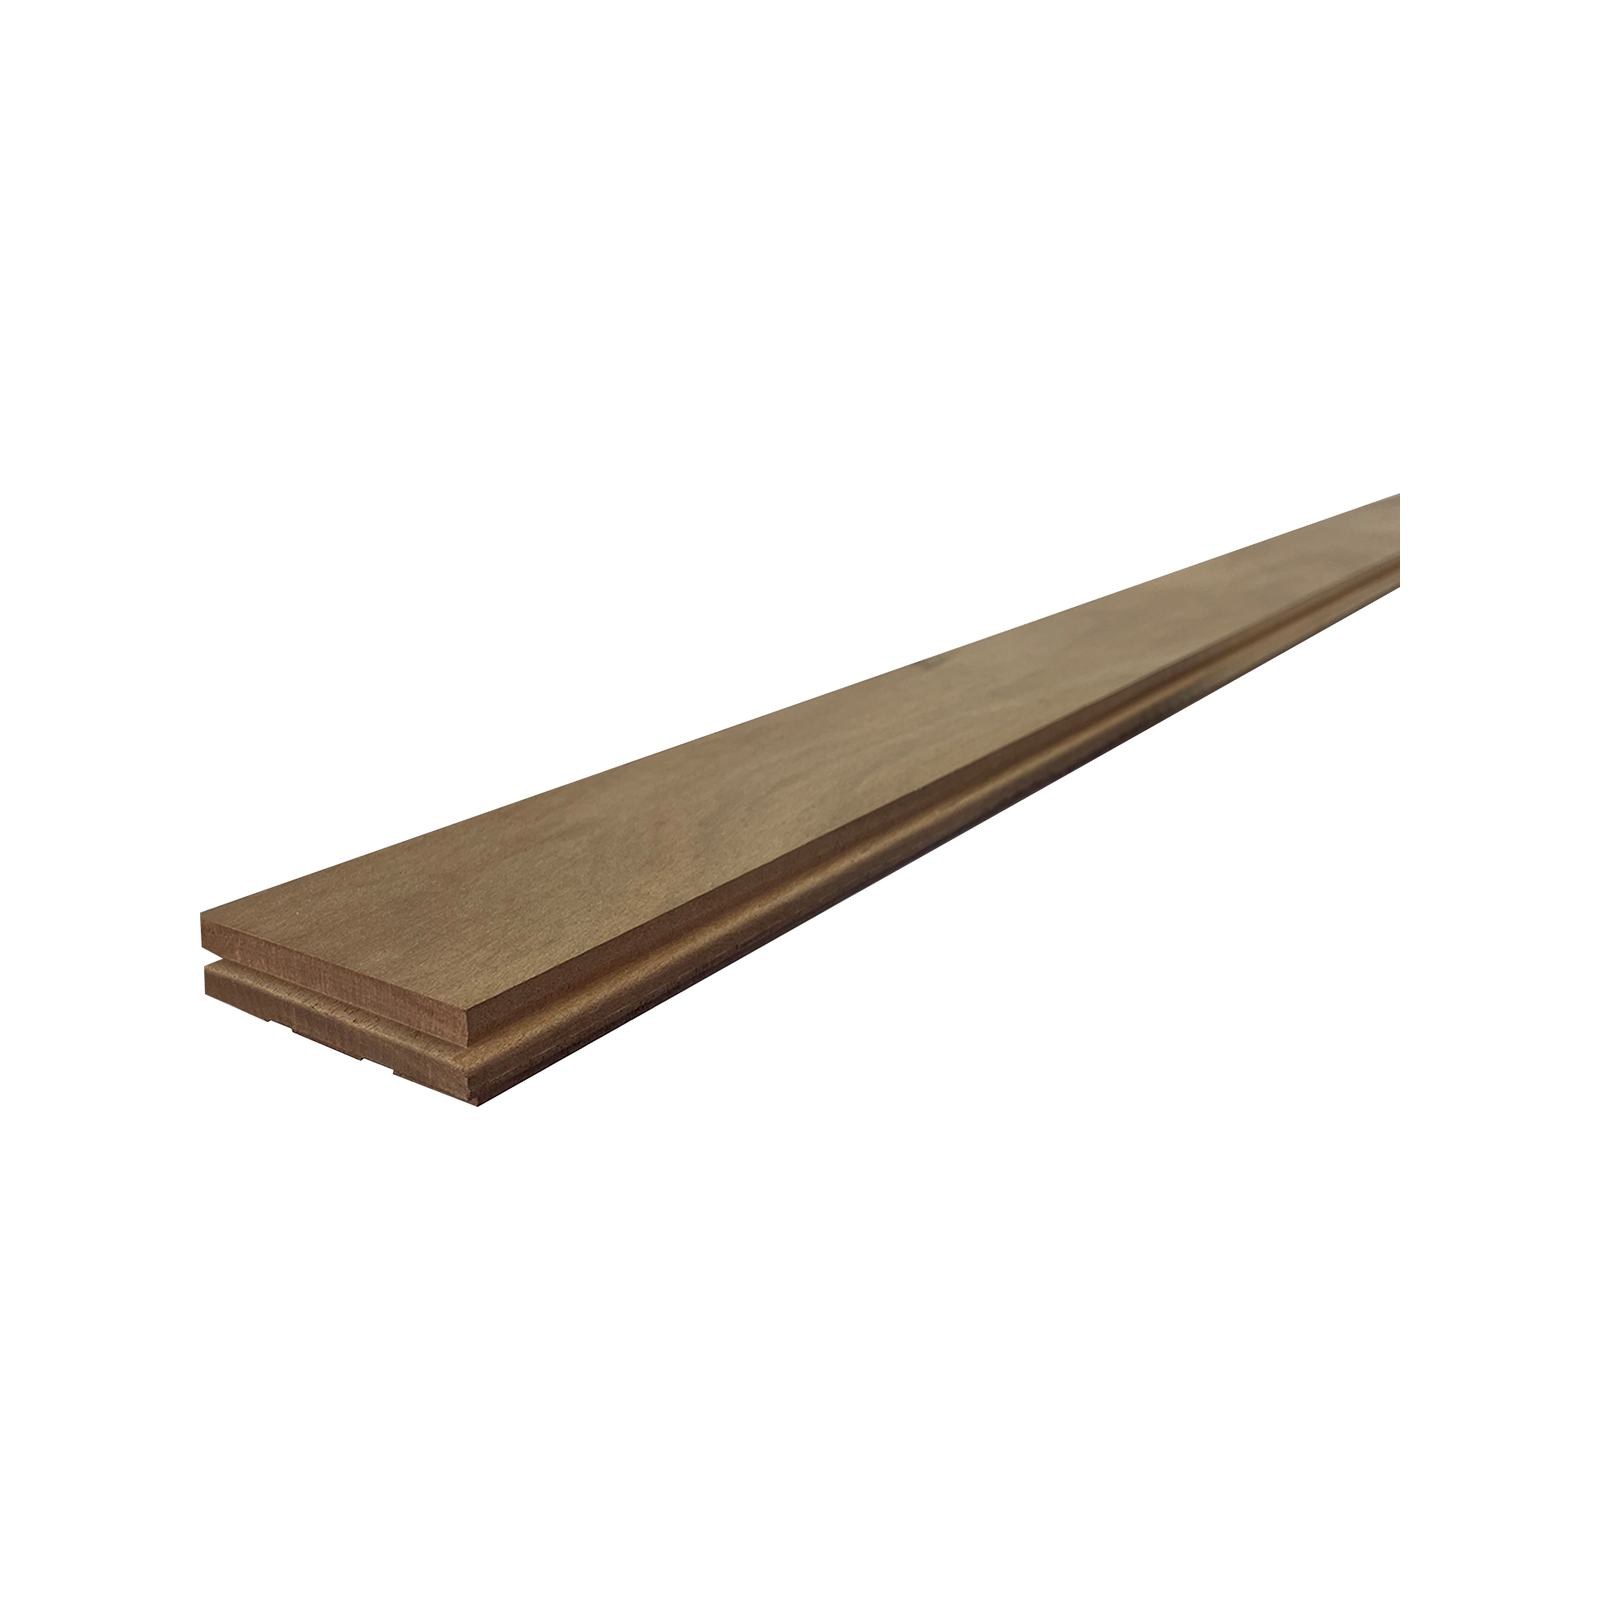 Pentarch Forestry 85 x 19mm Brushbox Flooring - Per Lineal Metre